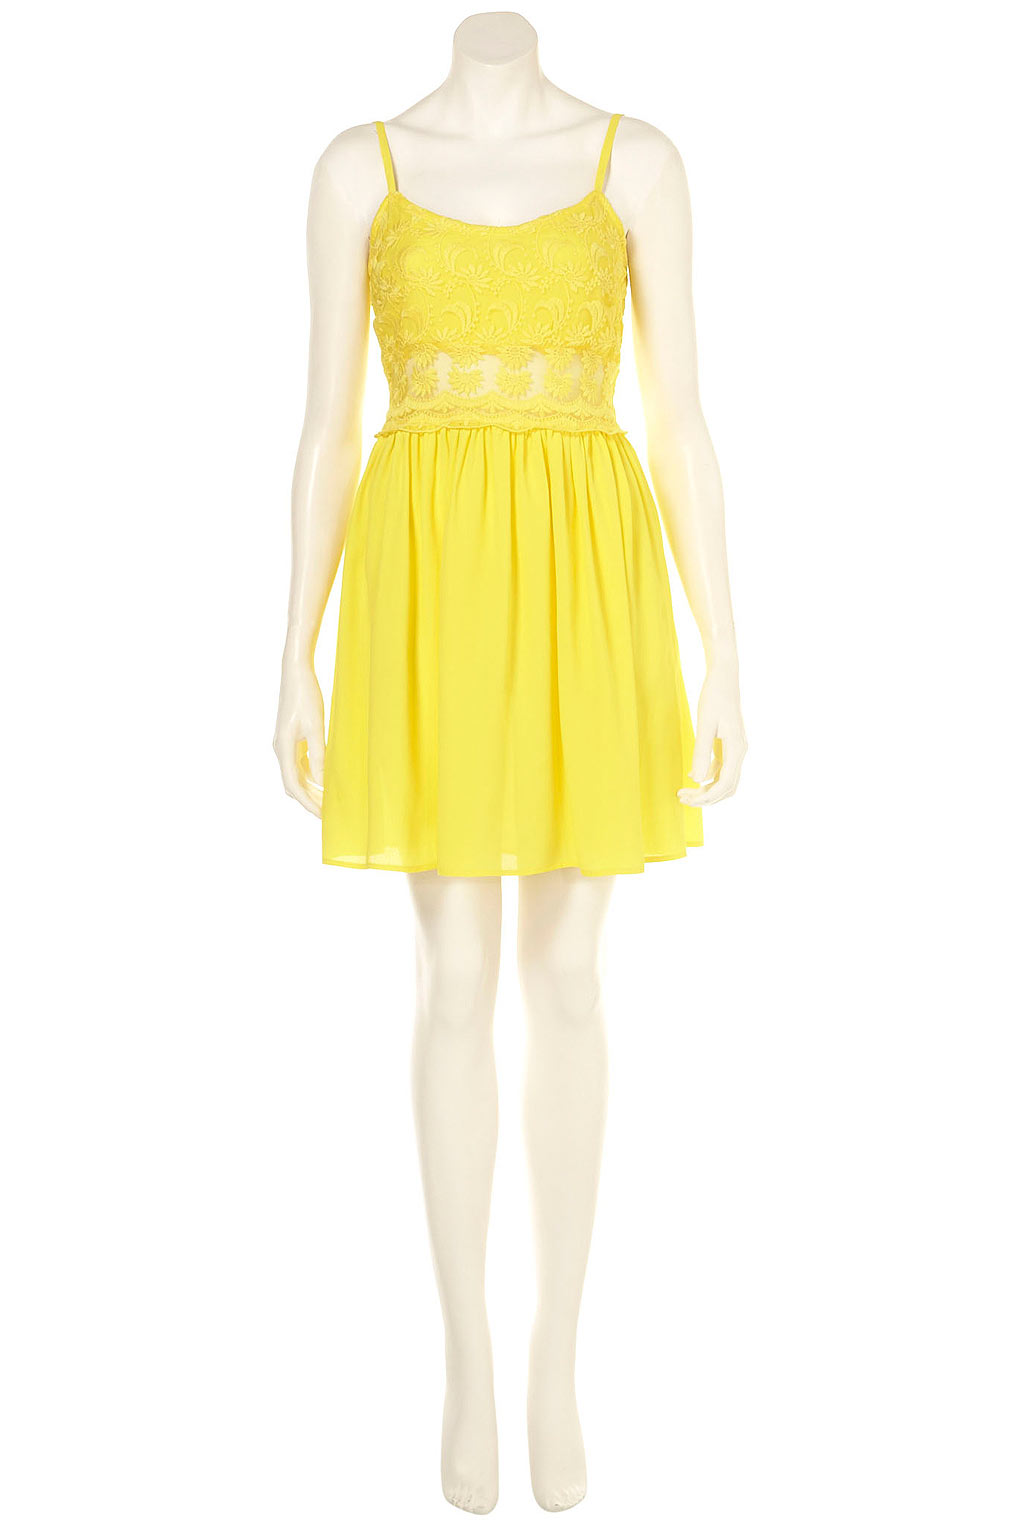 Lyst - Topshop Lace Strappy Sun Dress in Yellow